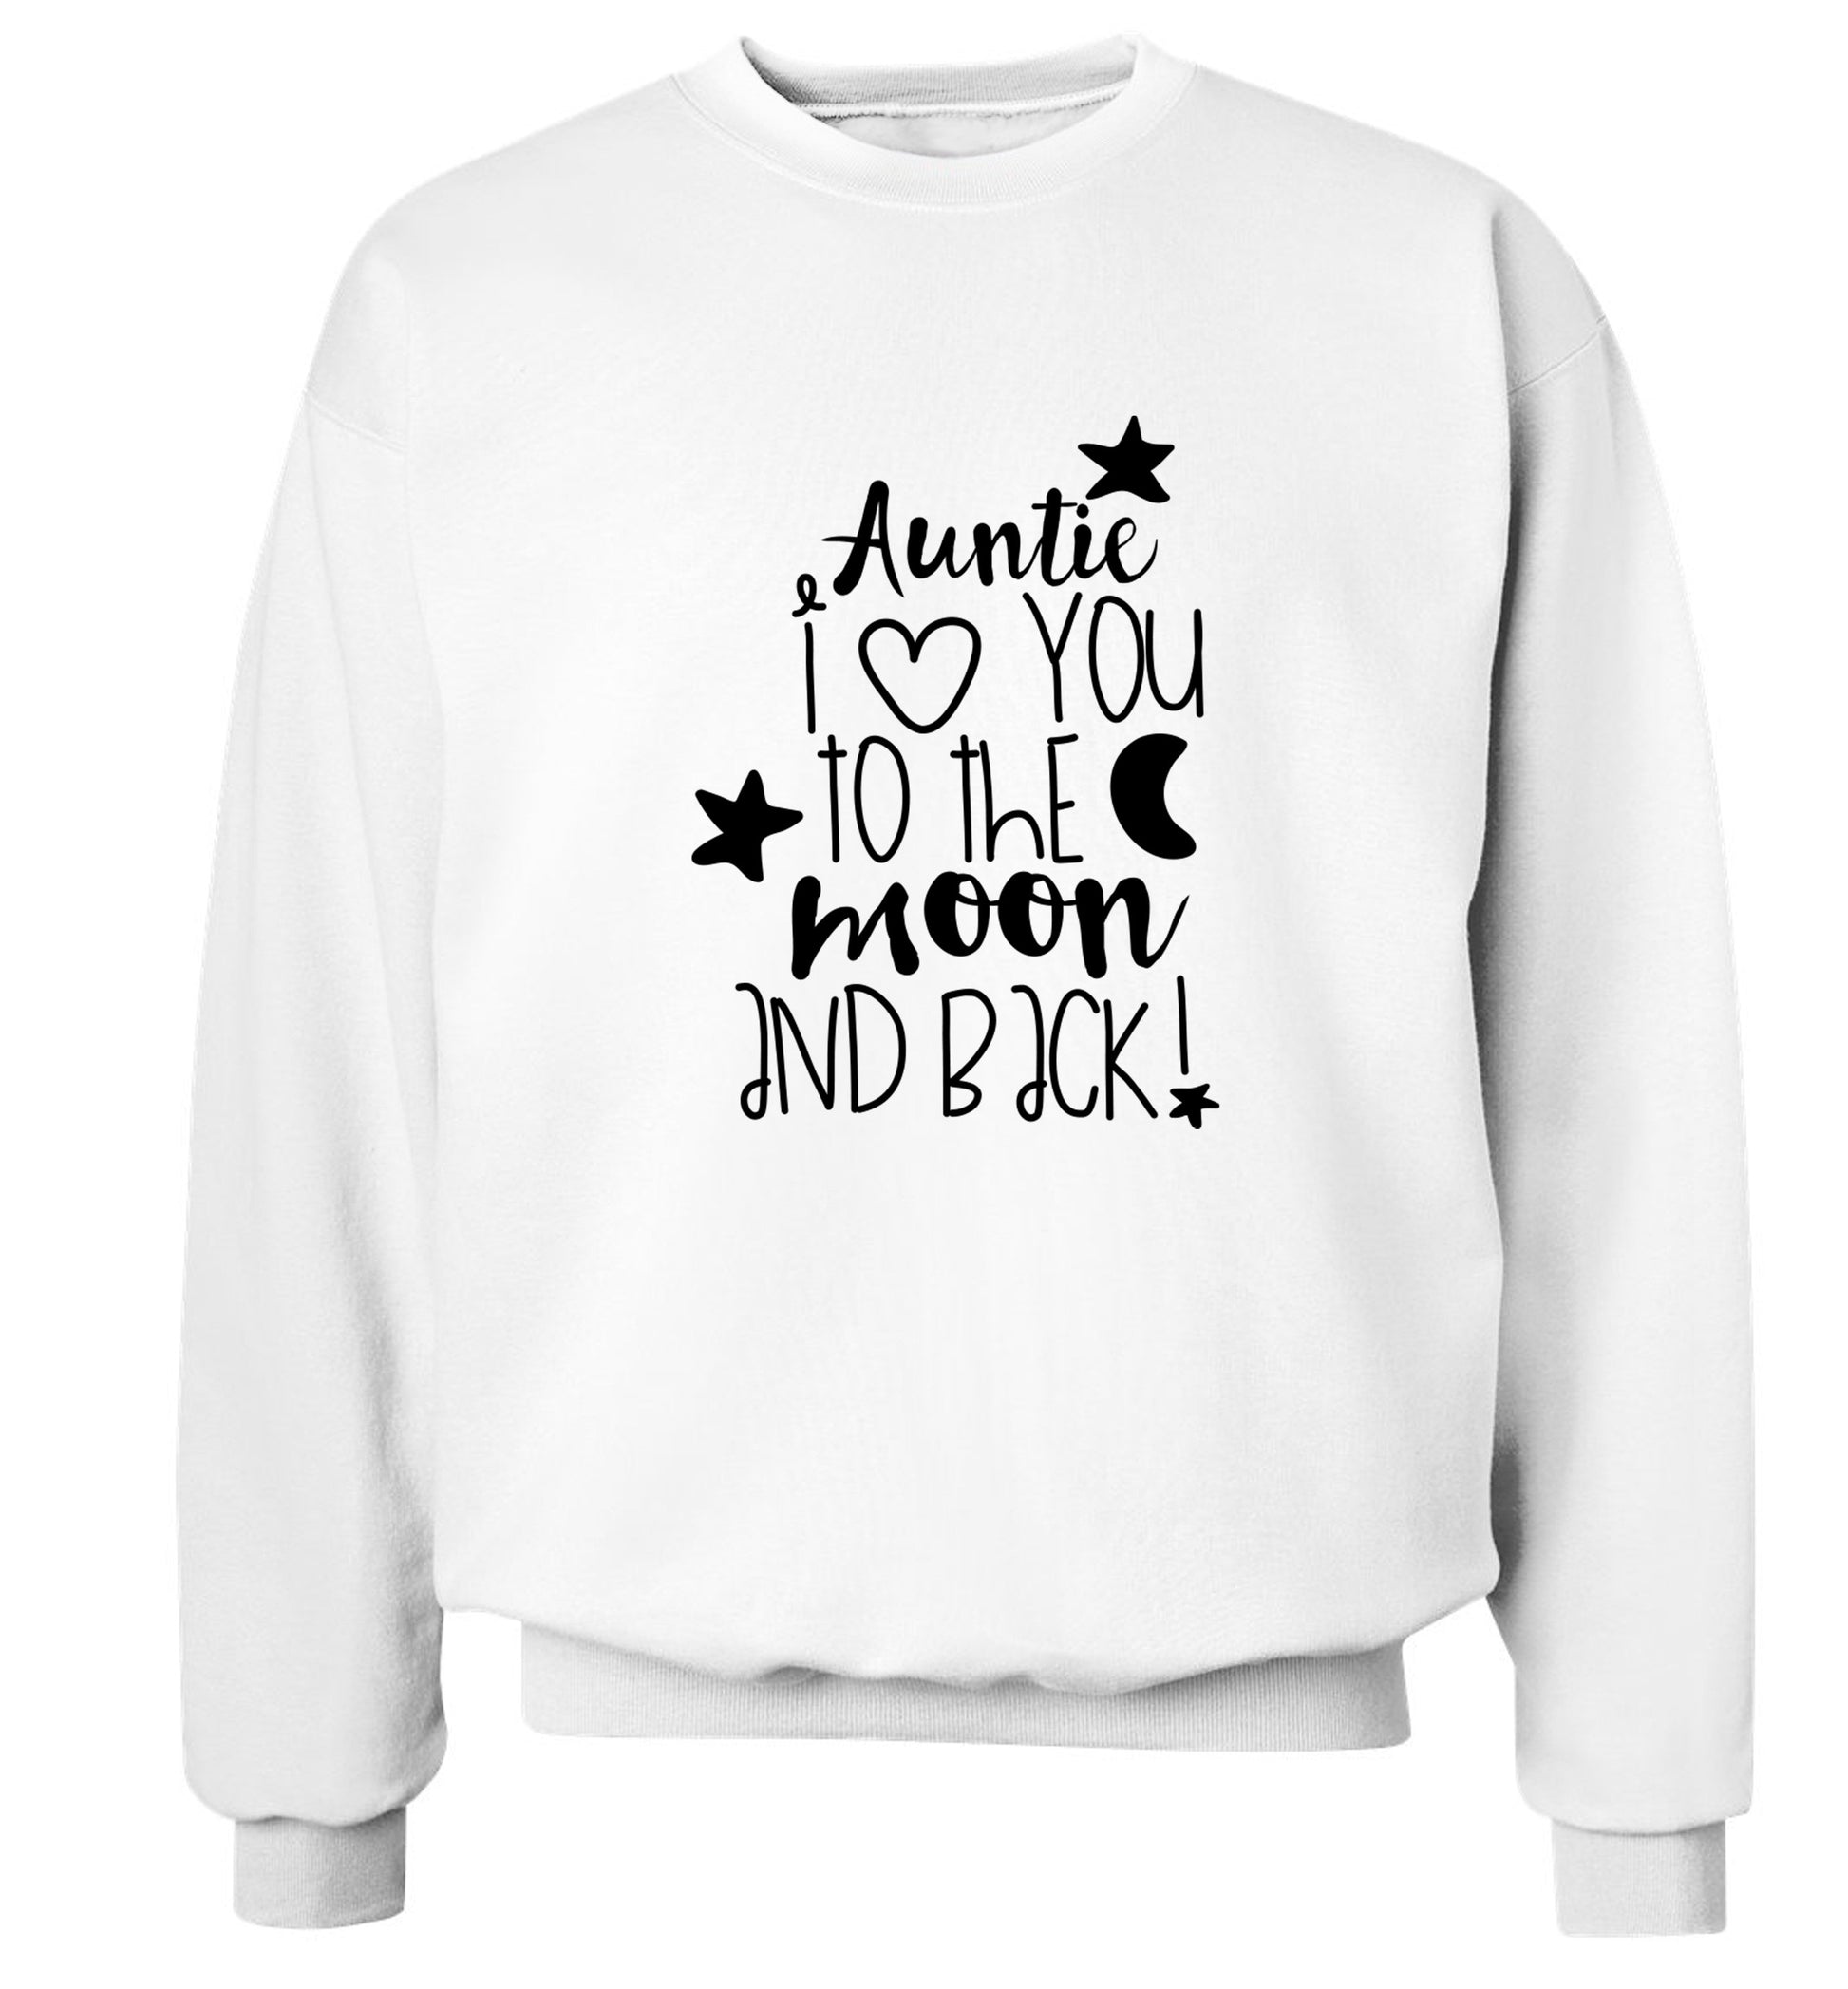 Auntie I love you to the moon and back Adult's unisex white  sweater 2XL